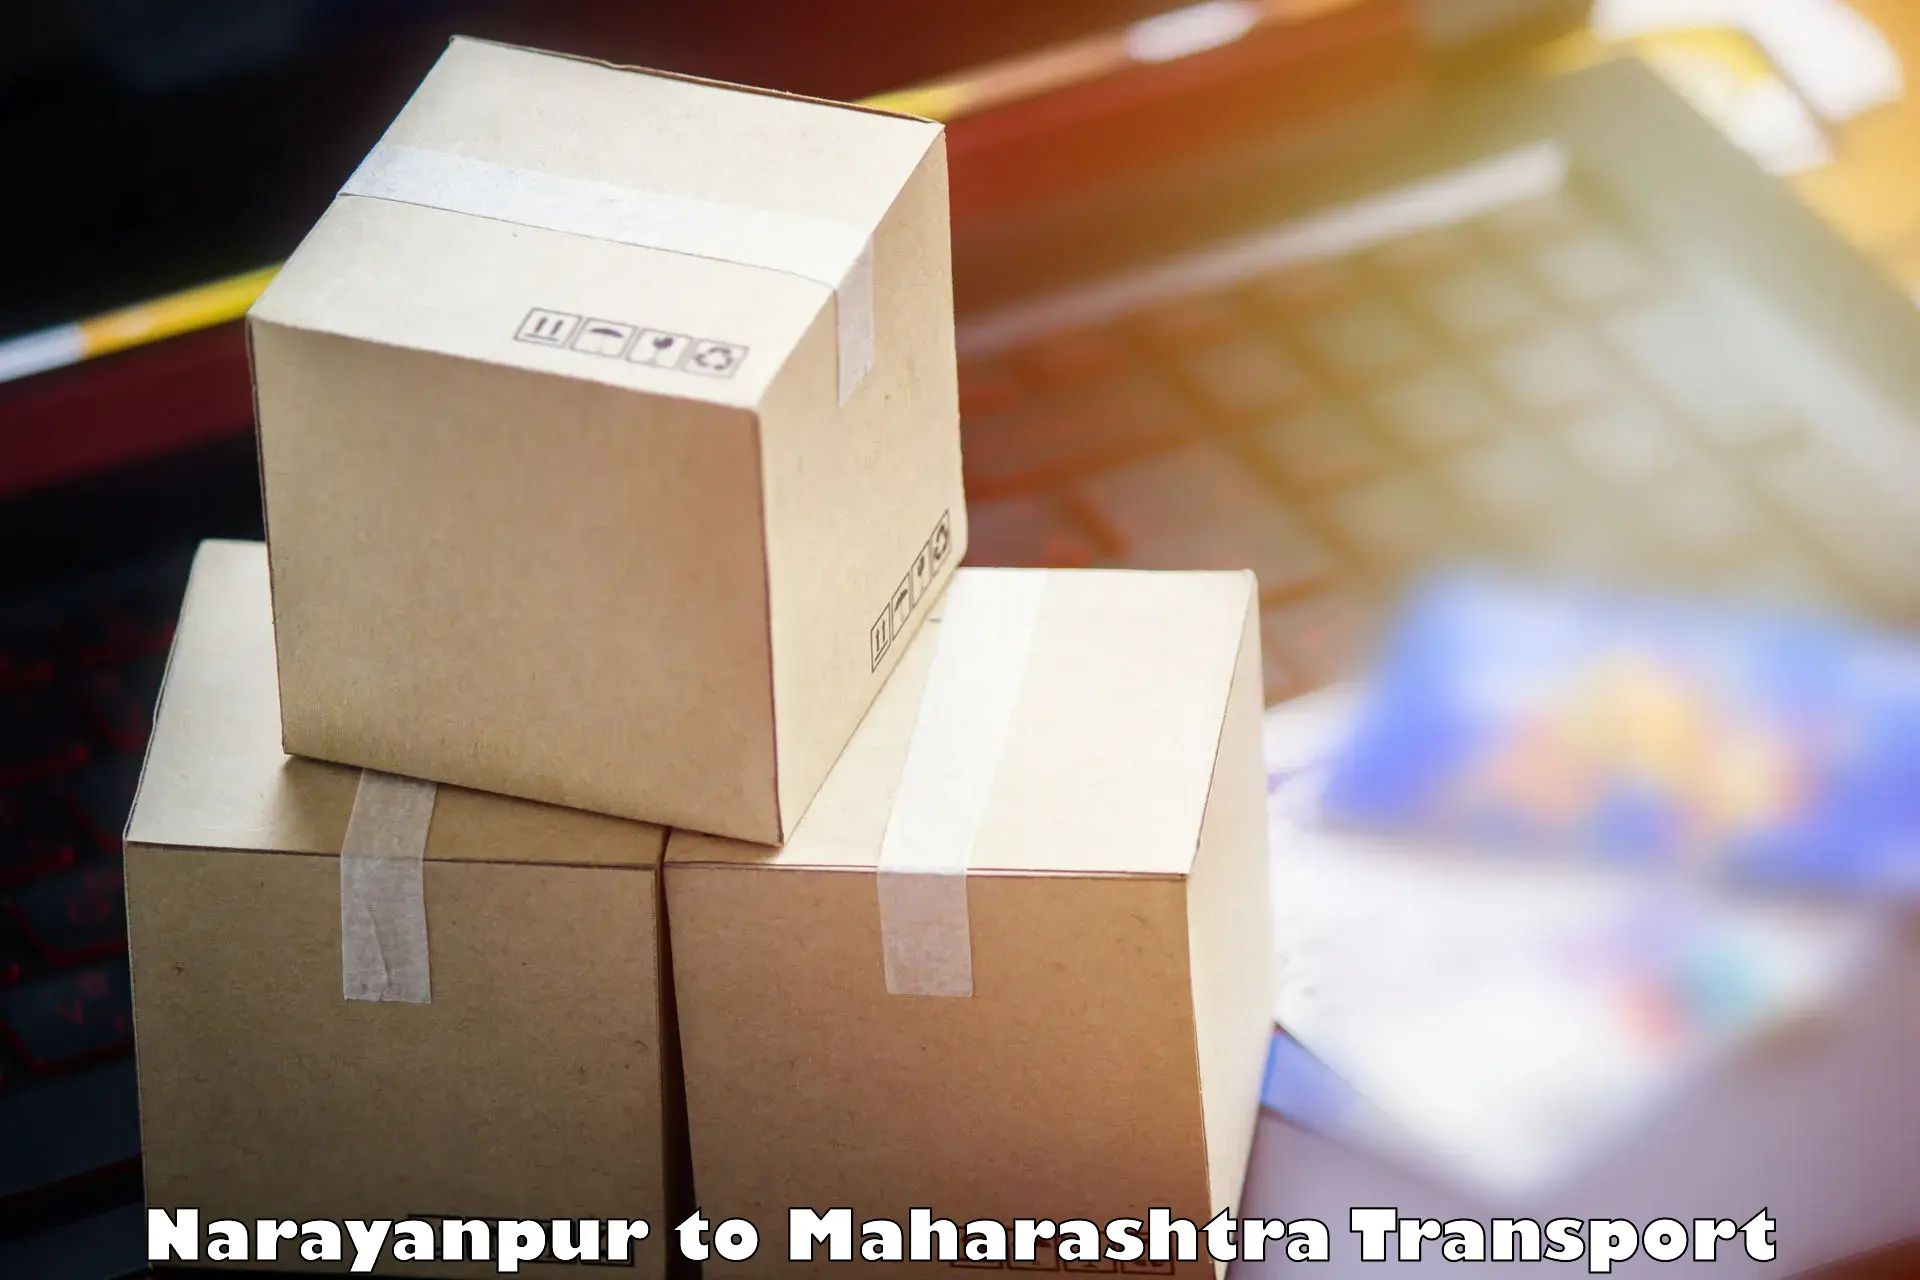 Goods delivery service Narayanpur to Sangamner